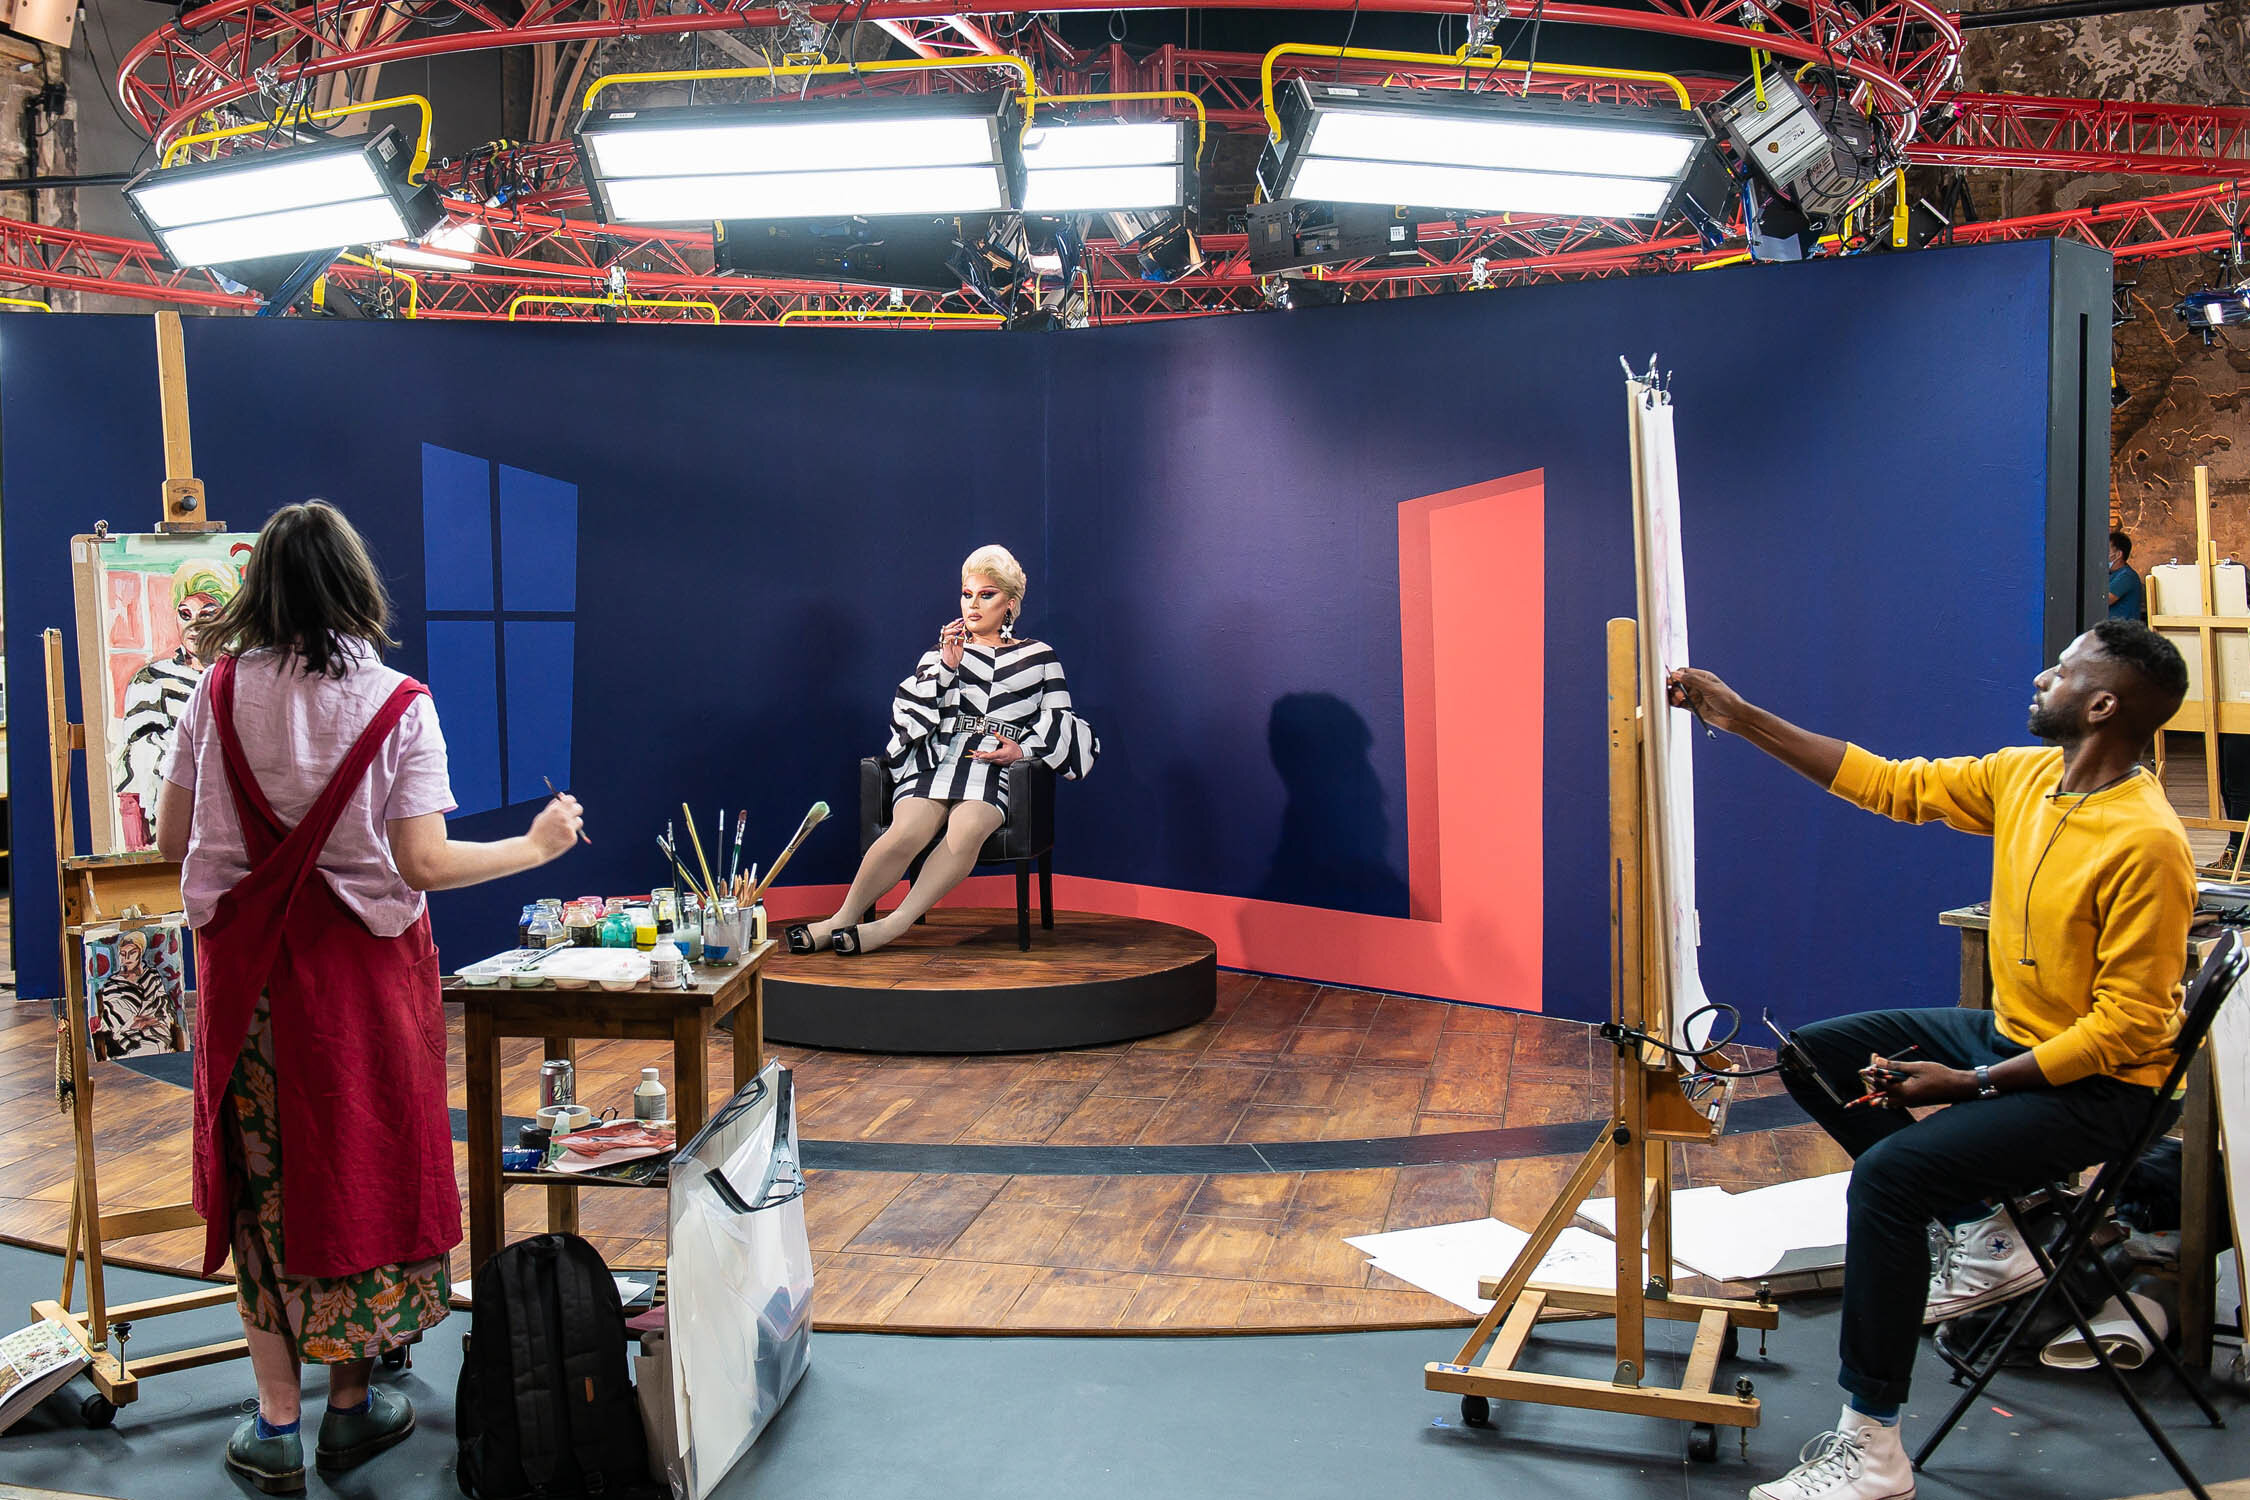 Behind The Scenes At The Heats Of Portrait Artist Of The Year Series 7 Curtis Holder